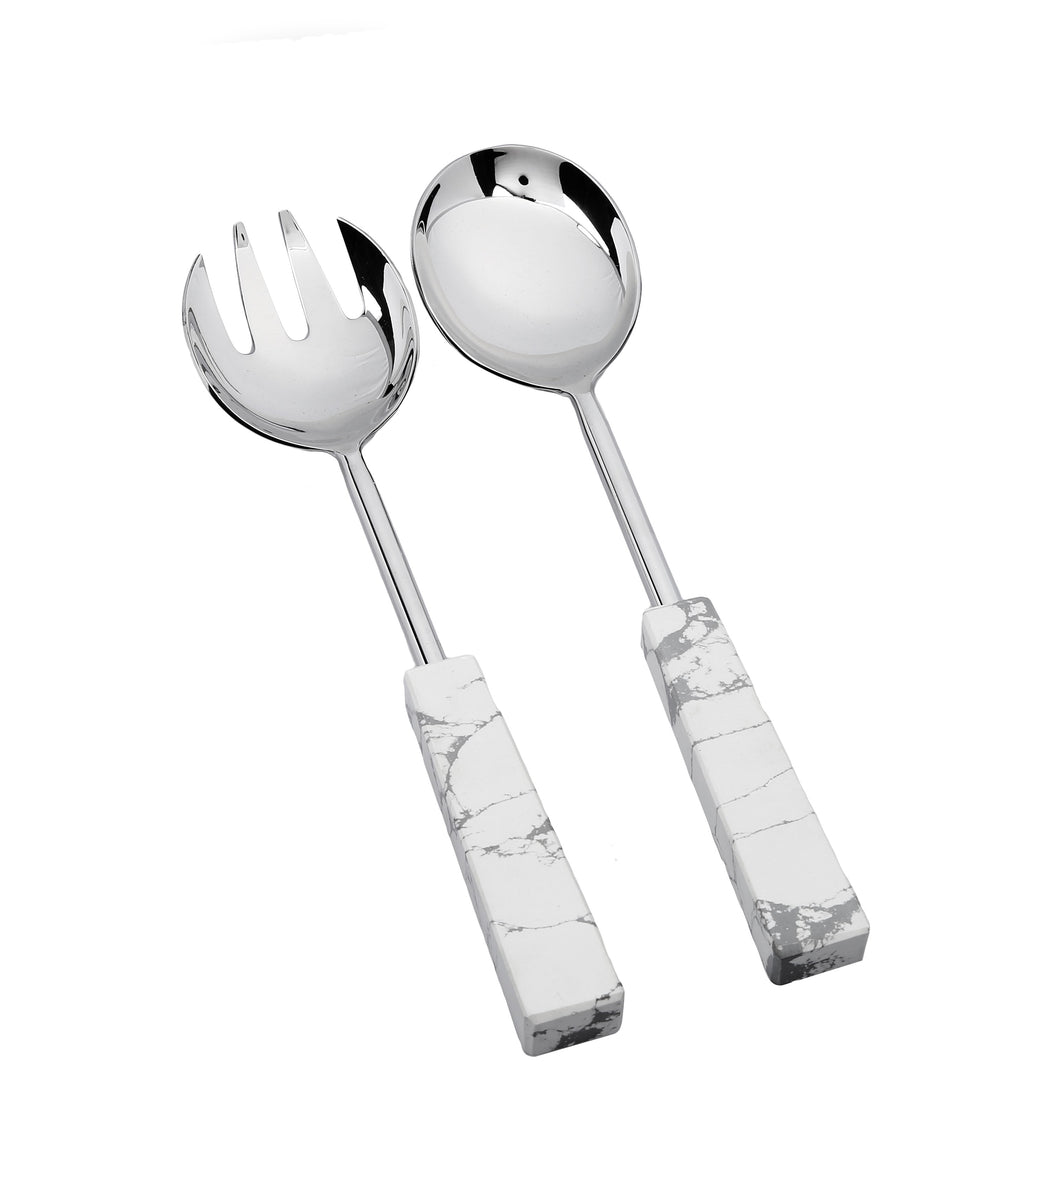 Set of 2 Stainless Steel Salad Servers with White and Grey Stone Handles by Classic Touch